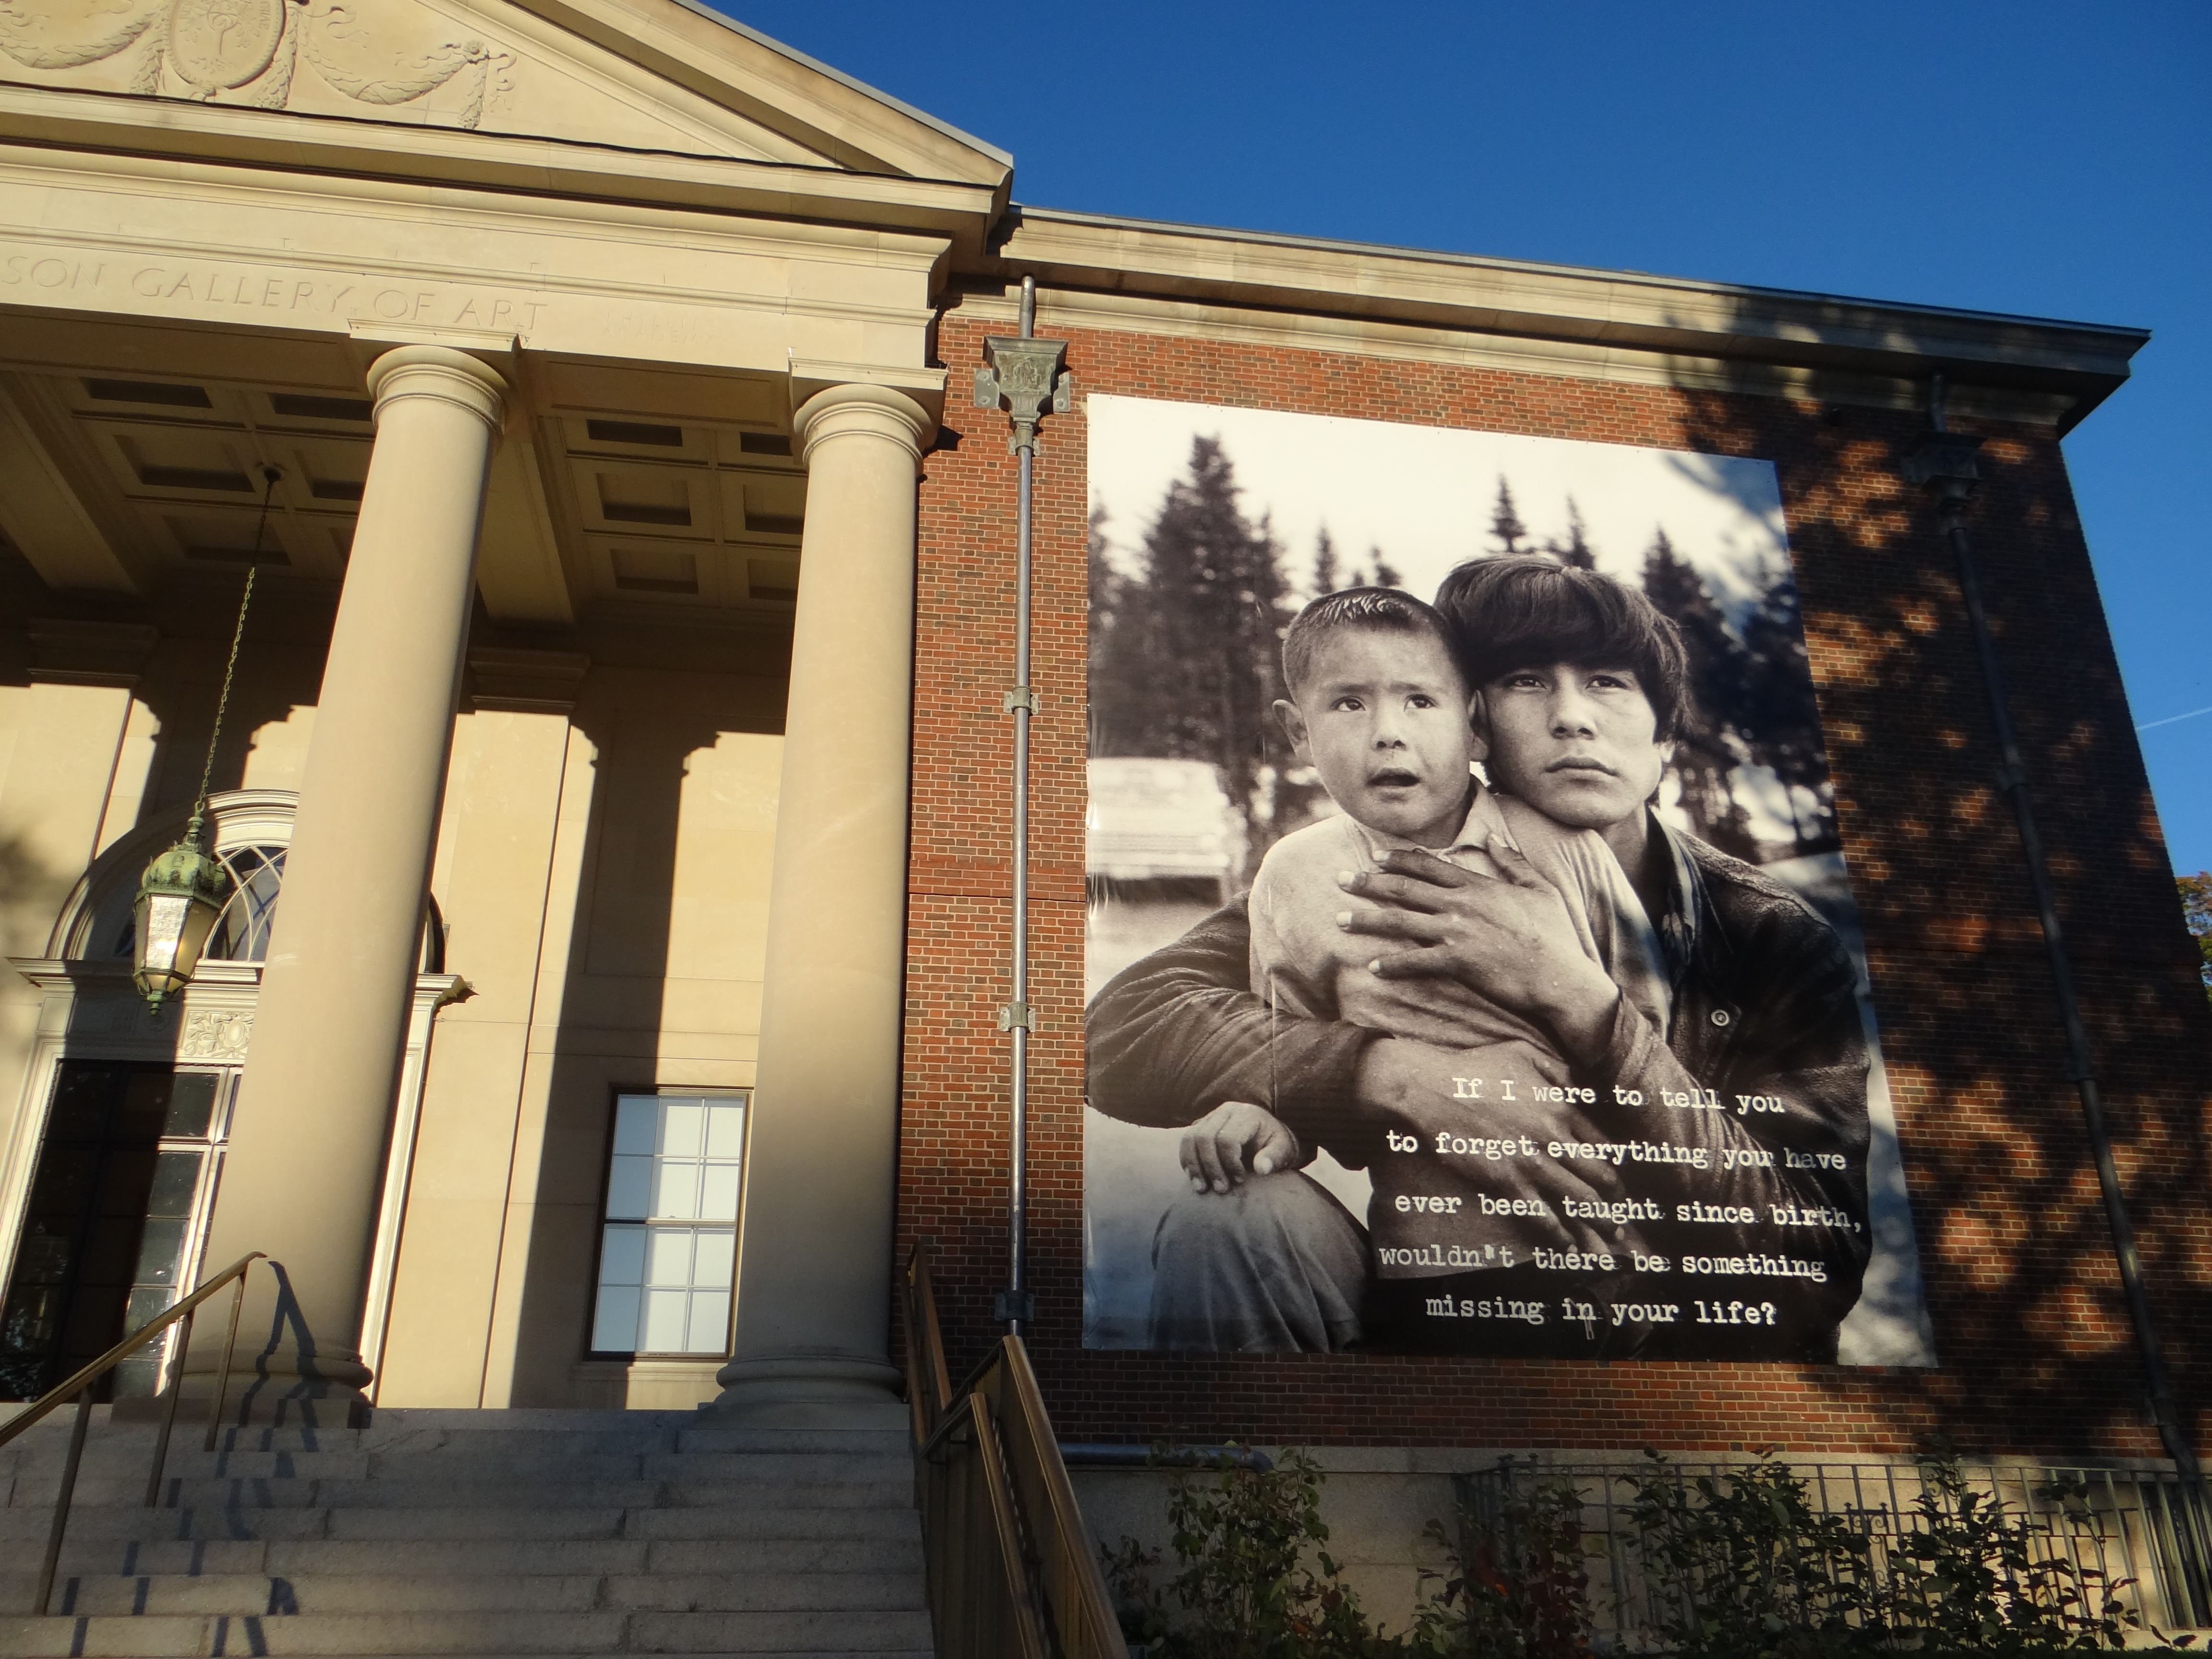 Outdoor vinyl banners printed and installed for museum exhibit